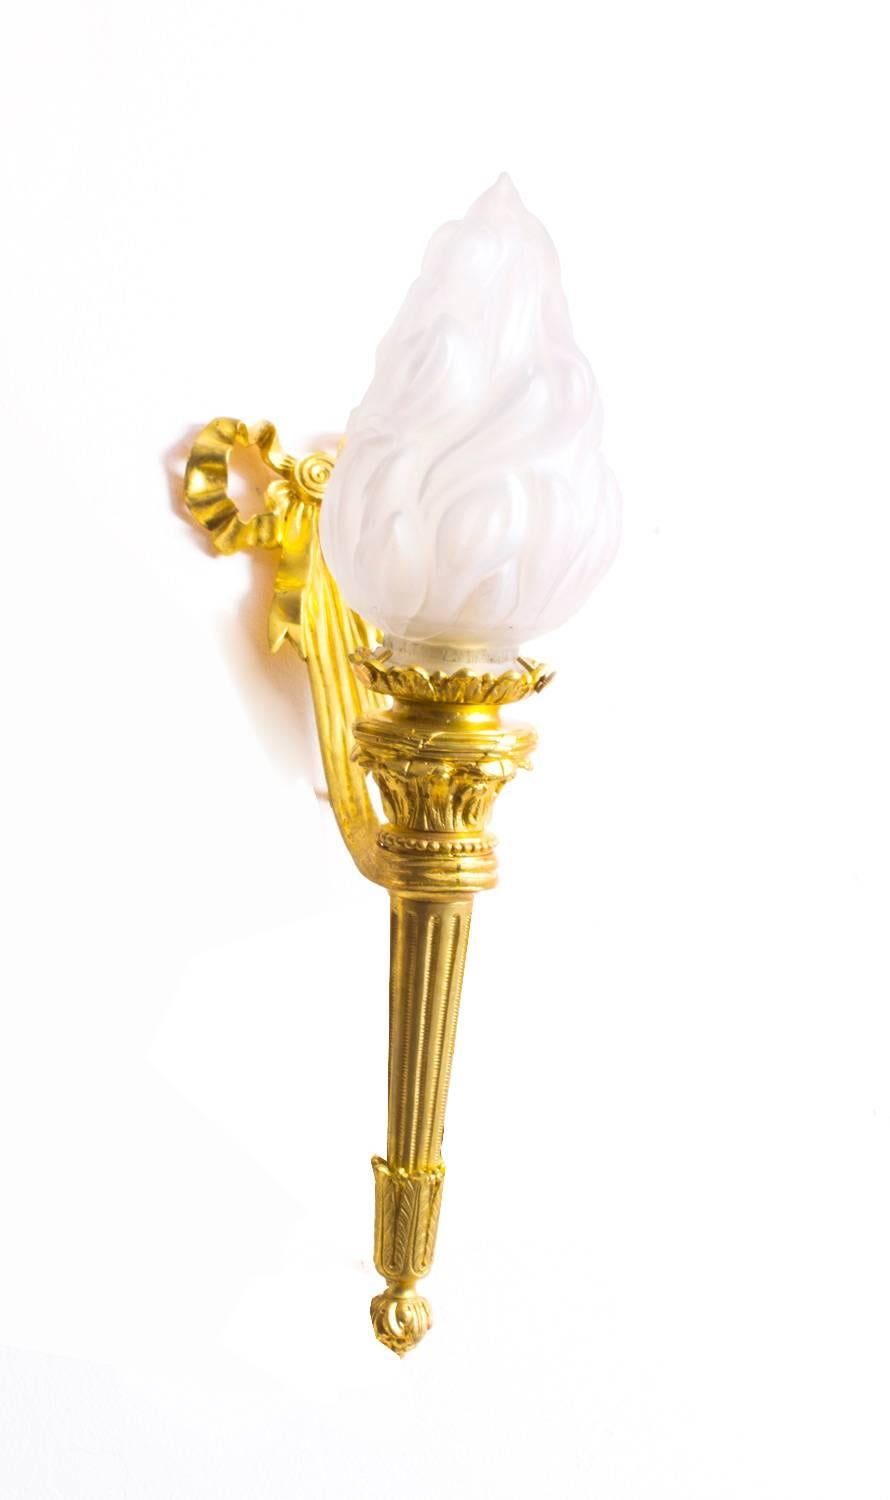 This is a superb pair of stylish French ormolu and glass flaming torch wall lights, circa 1920 in date.

Each has an ormolu ribbon backplate holding a torch at an angle with frosted glass torches, the quality and craftsmanship of these stunning